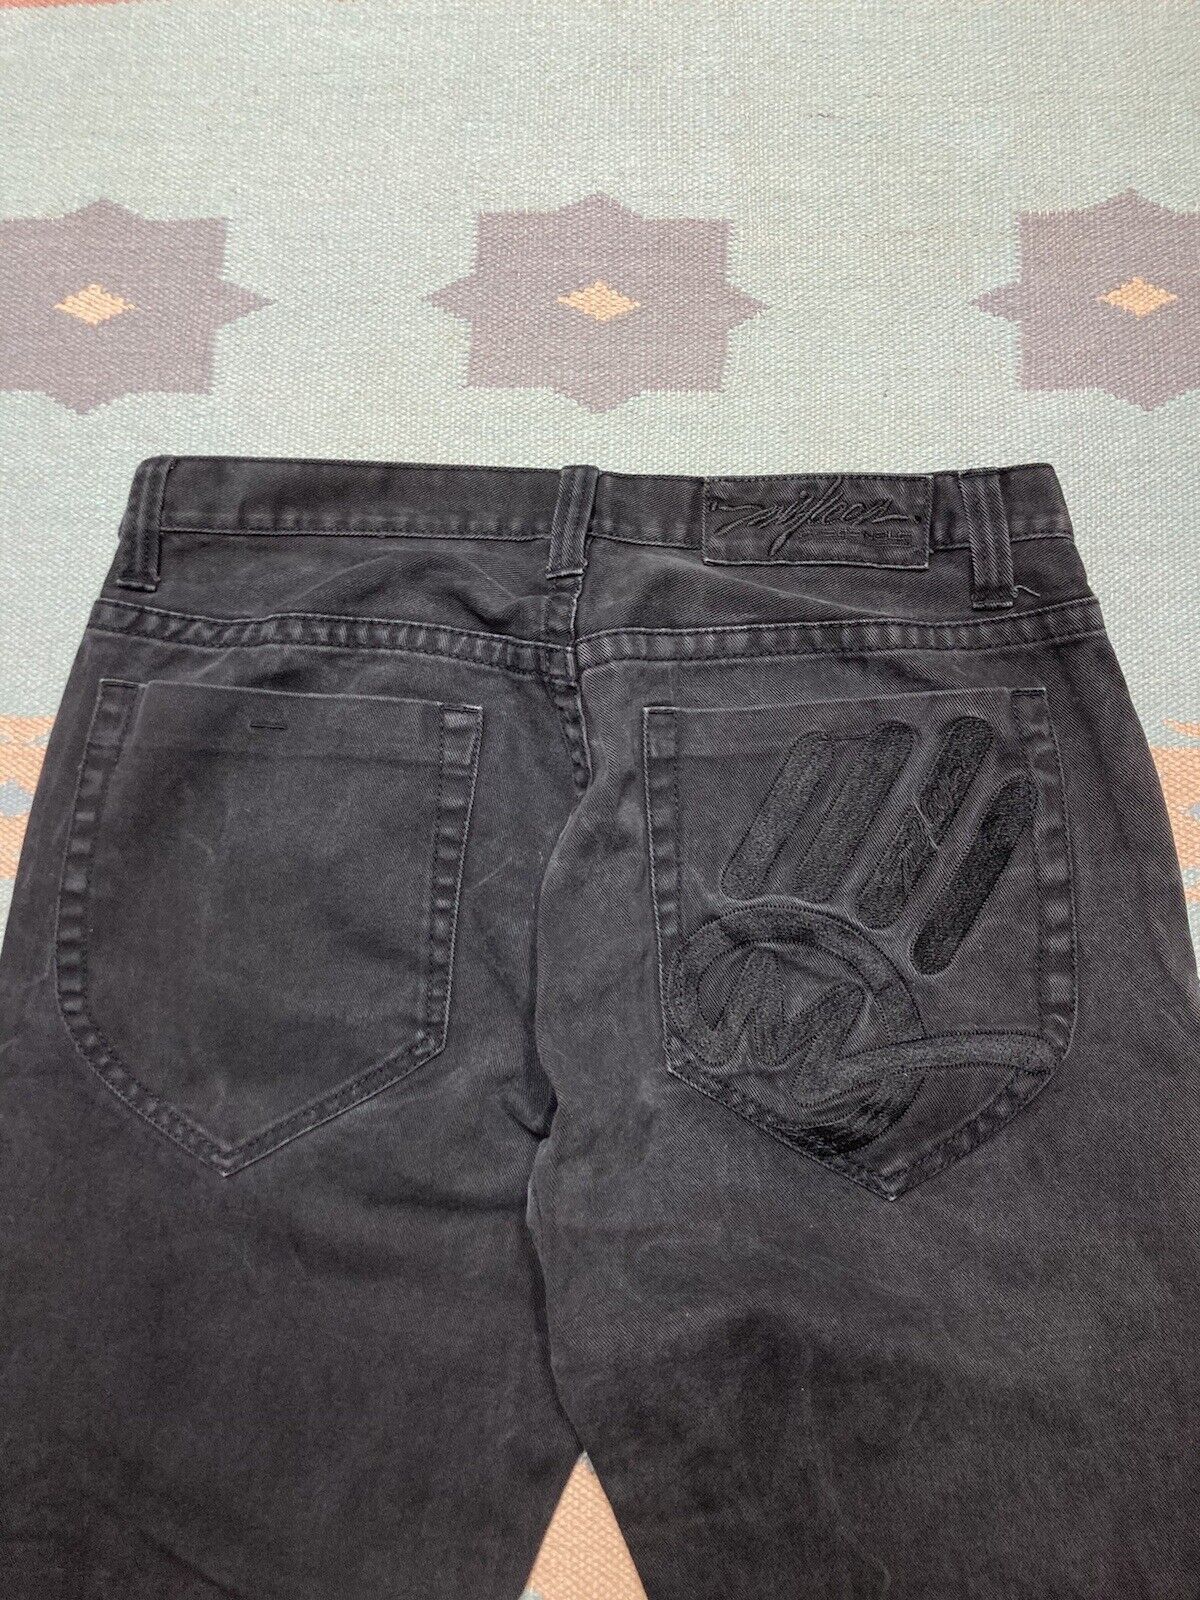 Vintage y2k baggy jeans miskeen embroidered goth grunge wide 38x31 Size US 38 / EU 54 - 4 Thumbnail